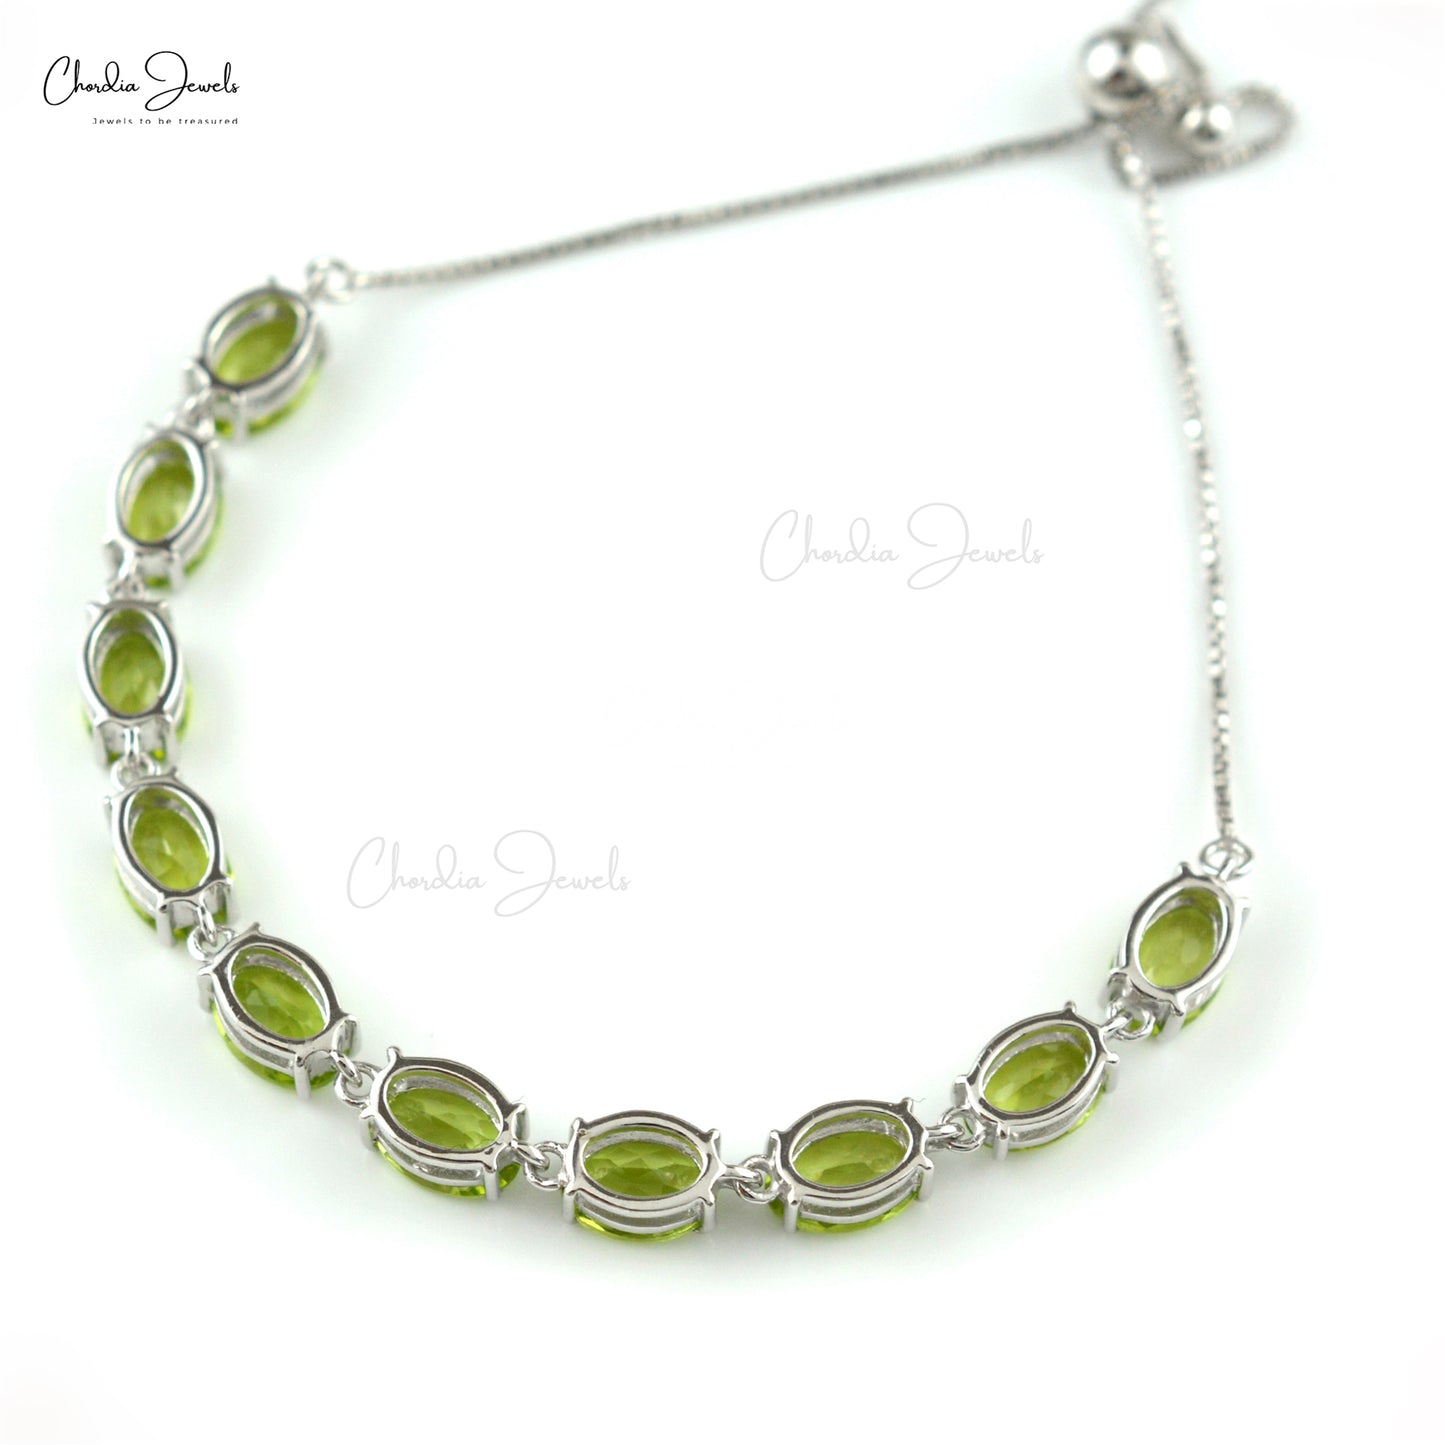 Hot Selling Bracelet In 925 Sterling Silver With Genuine Peridot Gemstone August Birthstone Jewelry At Wholesale Price